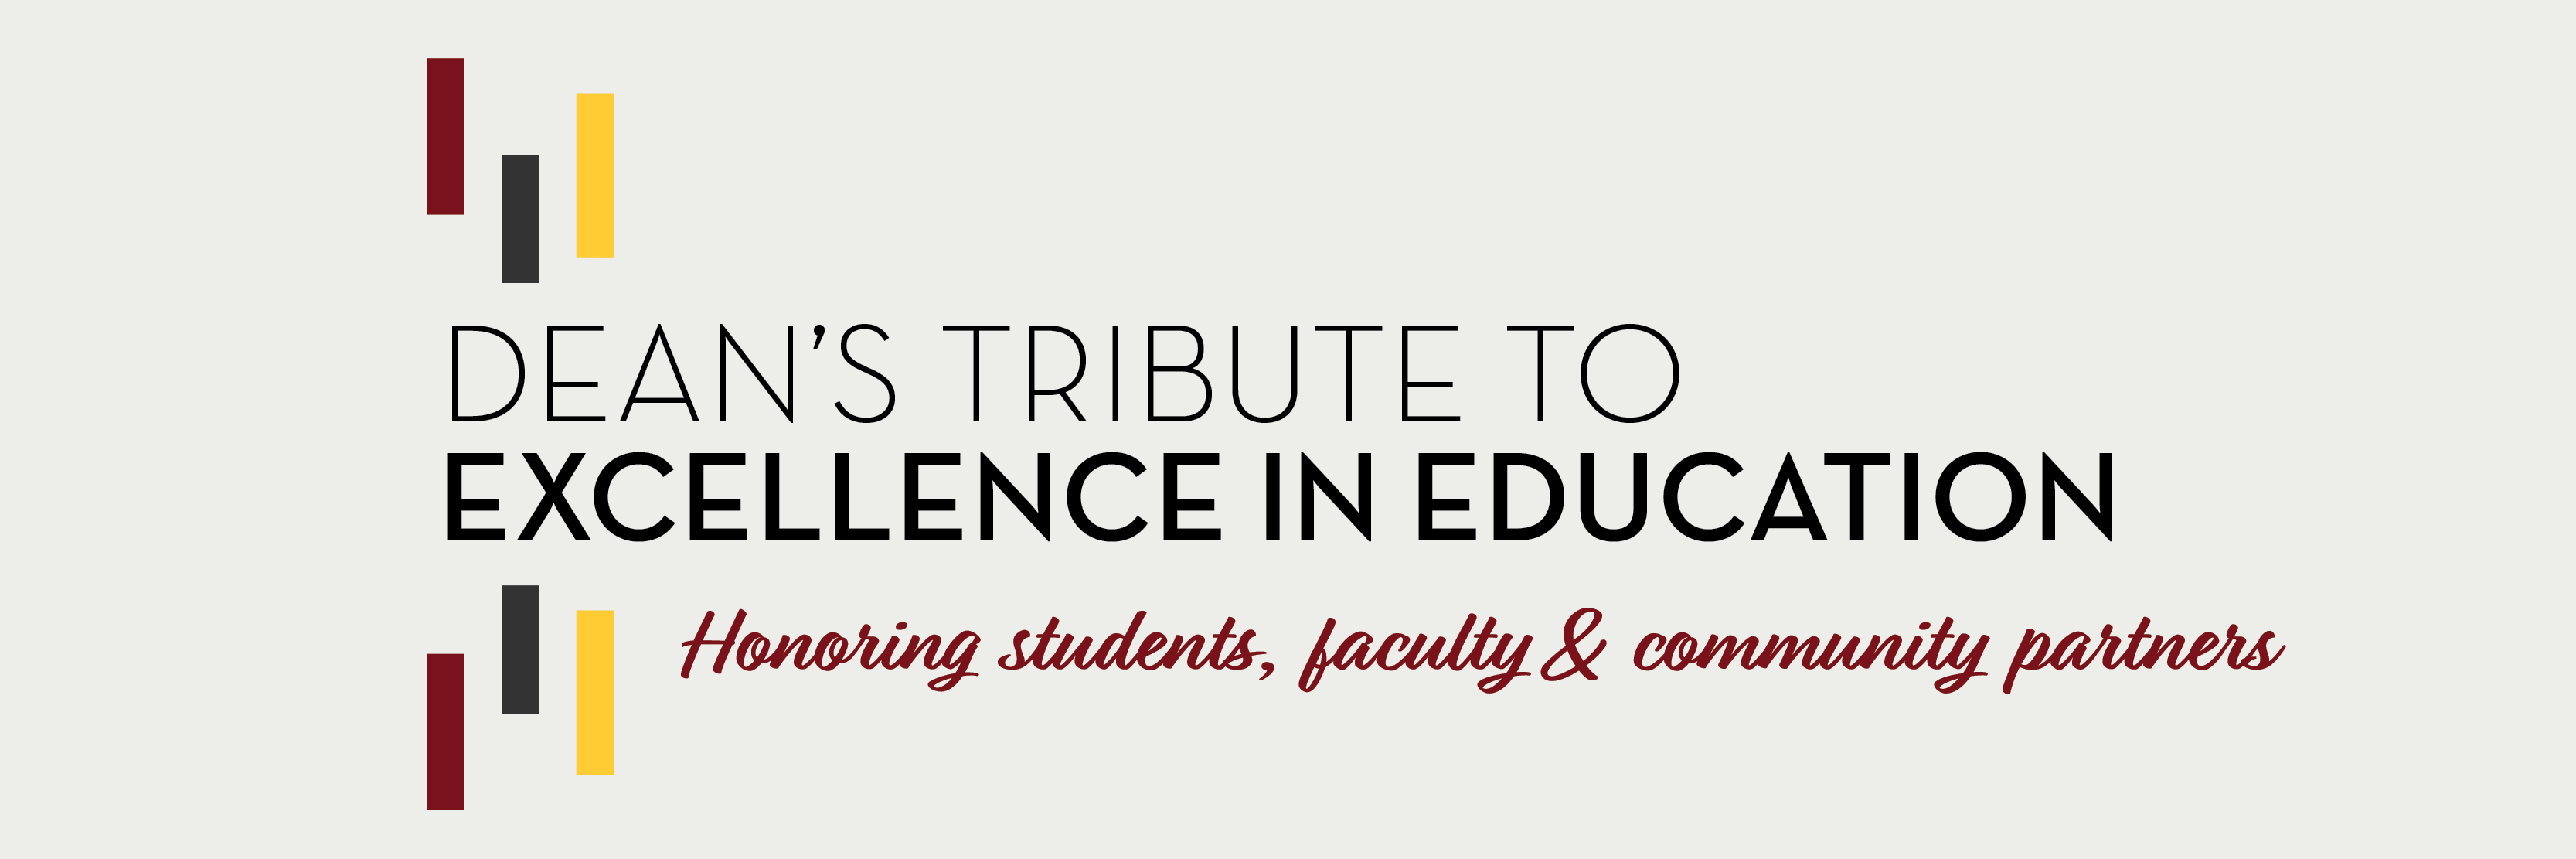 Dean's Tribute to Excellence in Education